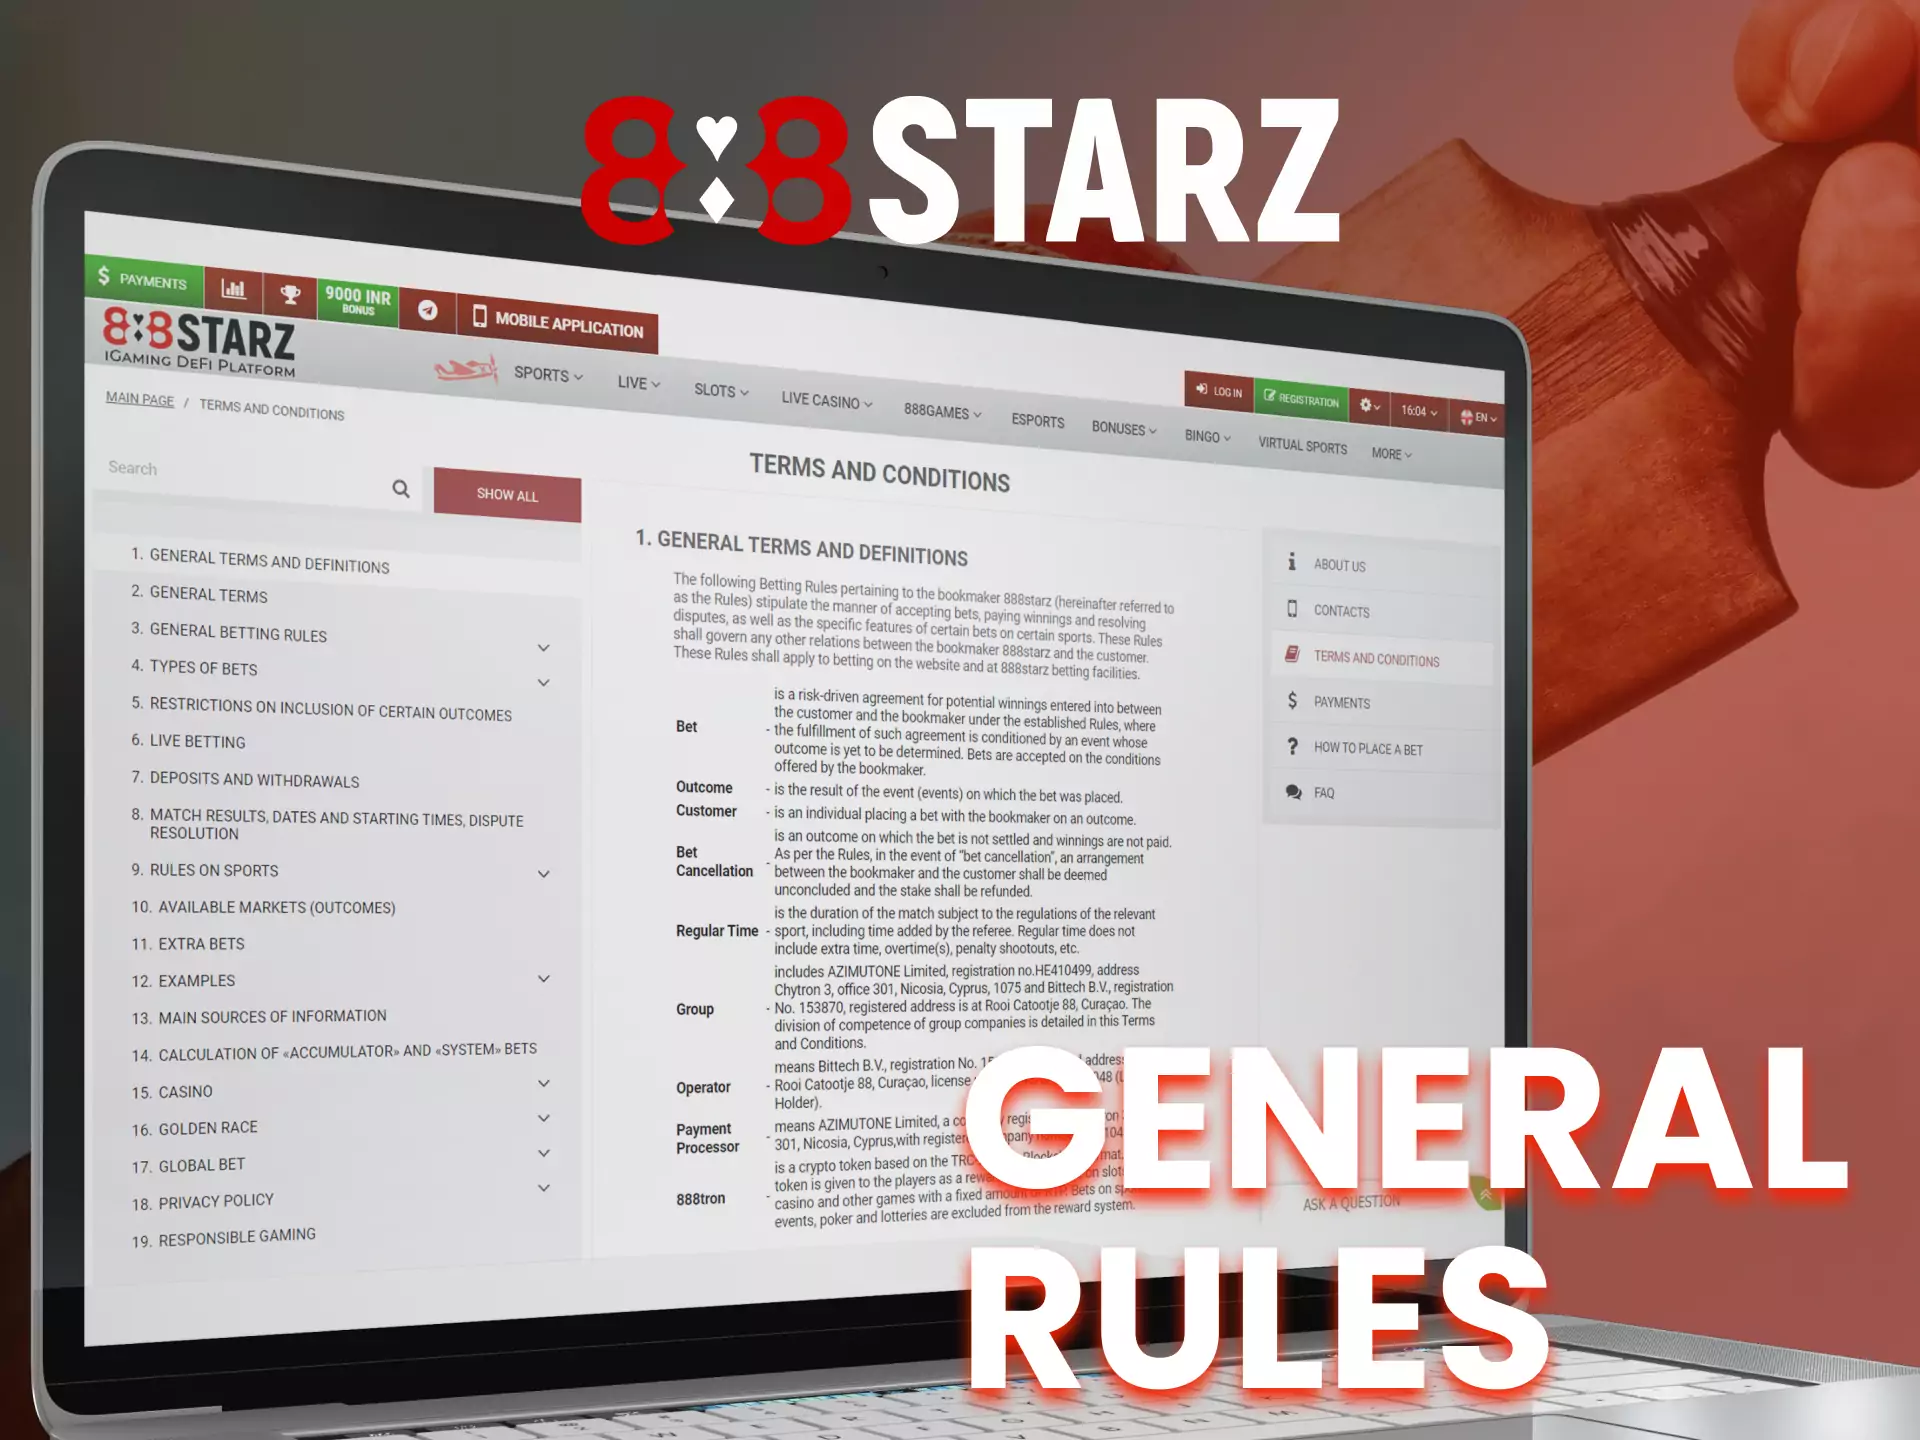 If you want to start betting you need to read 888starz rules.